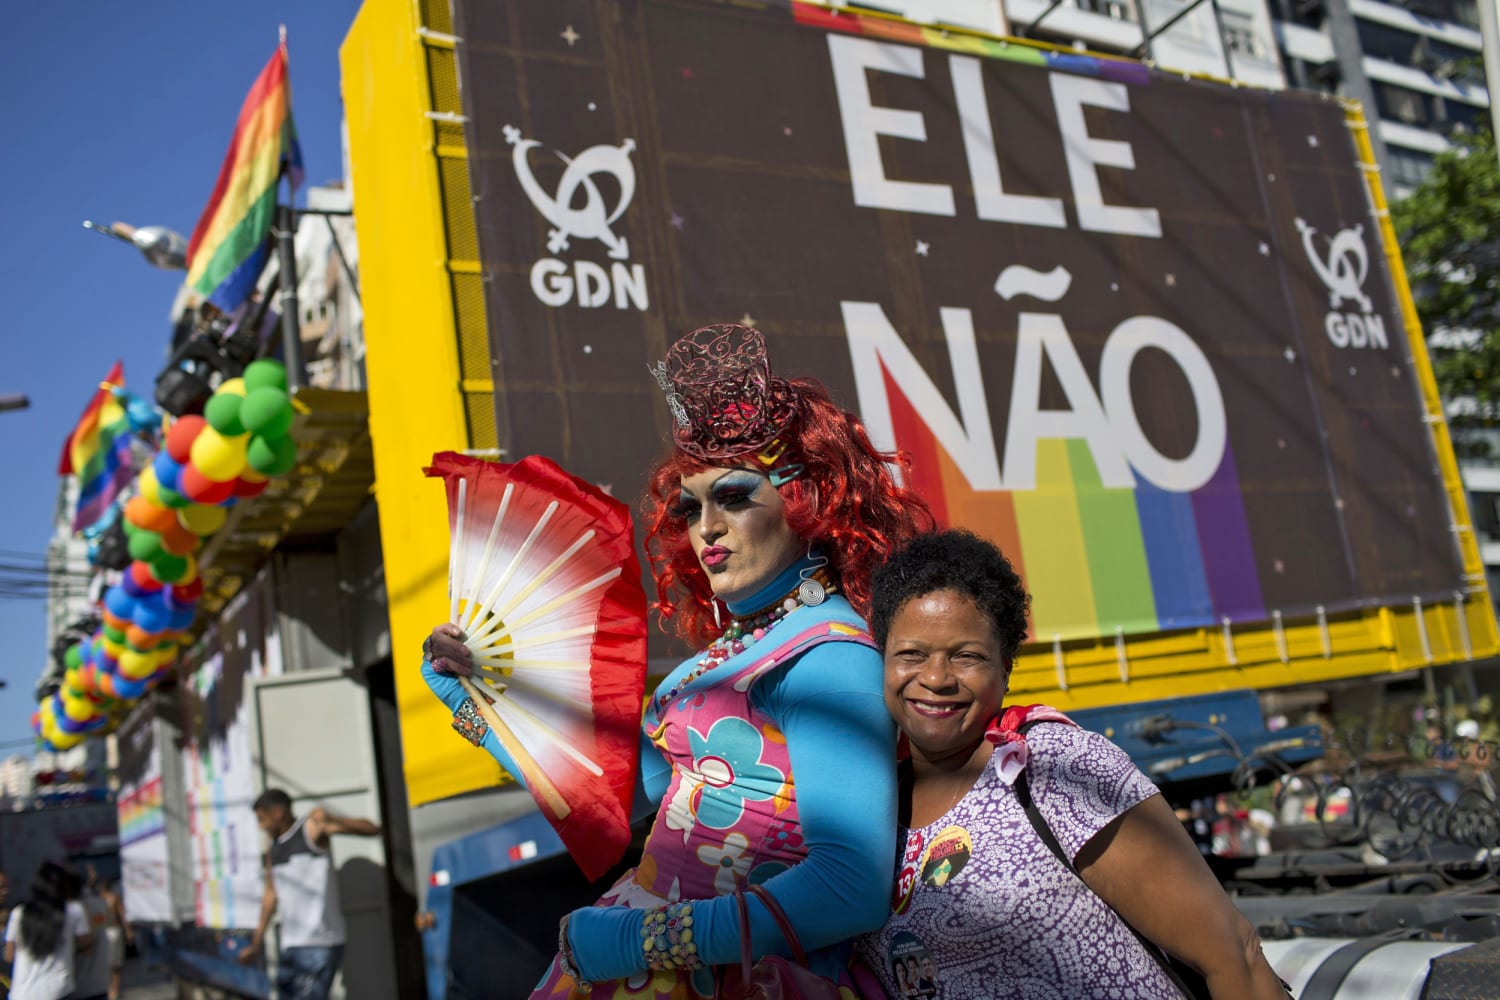 Judge questions Brazil confederation over possible anti-gay